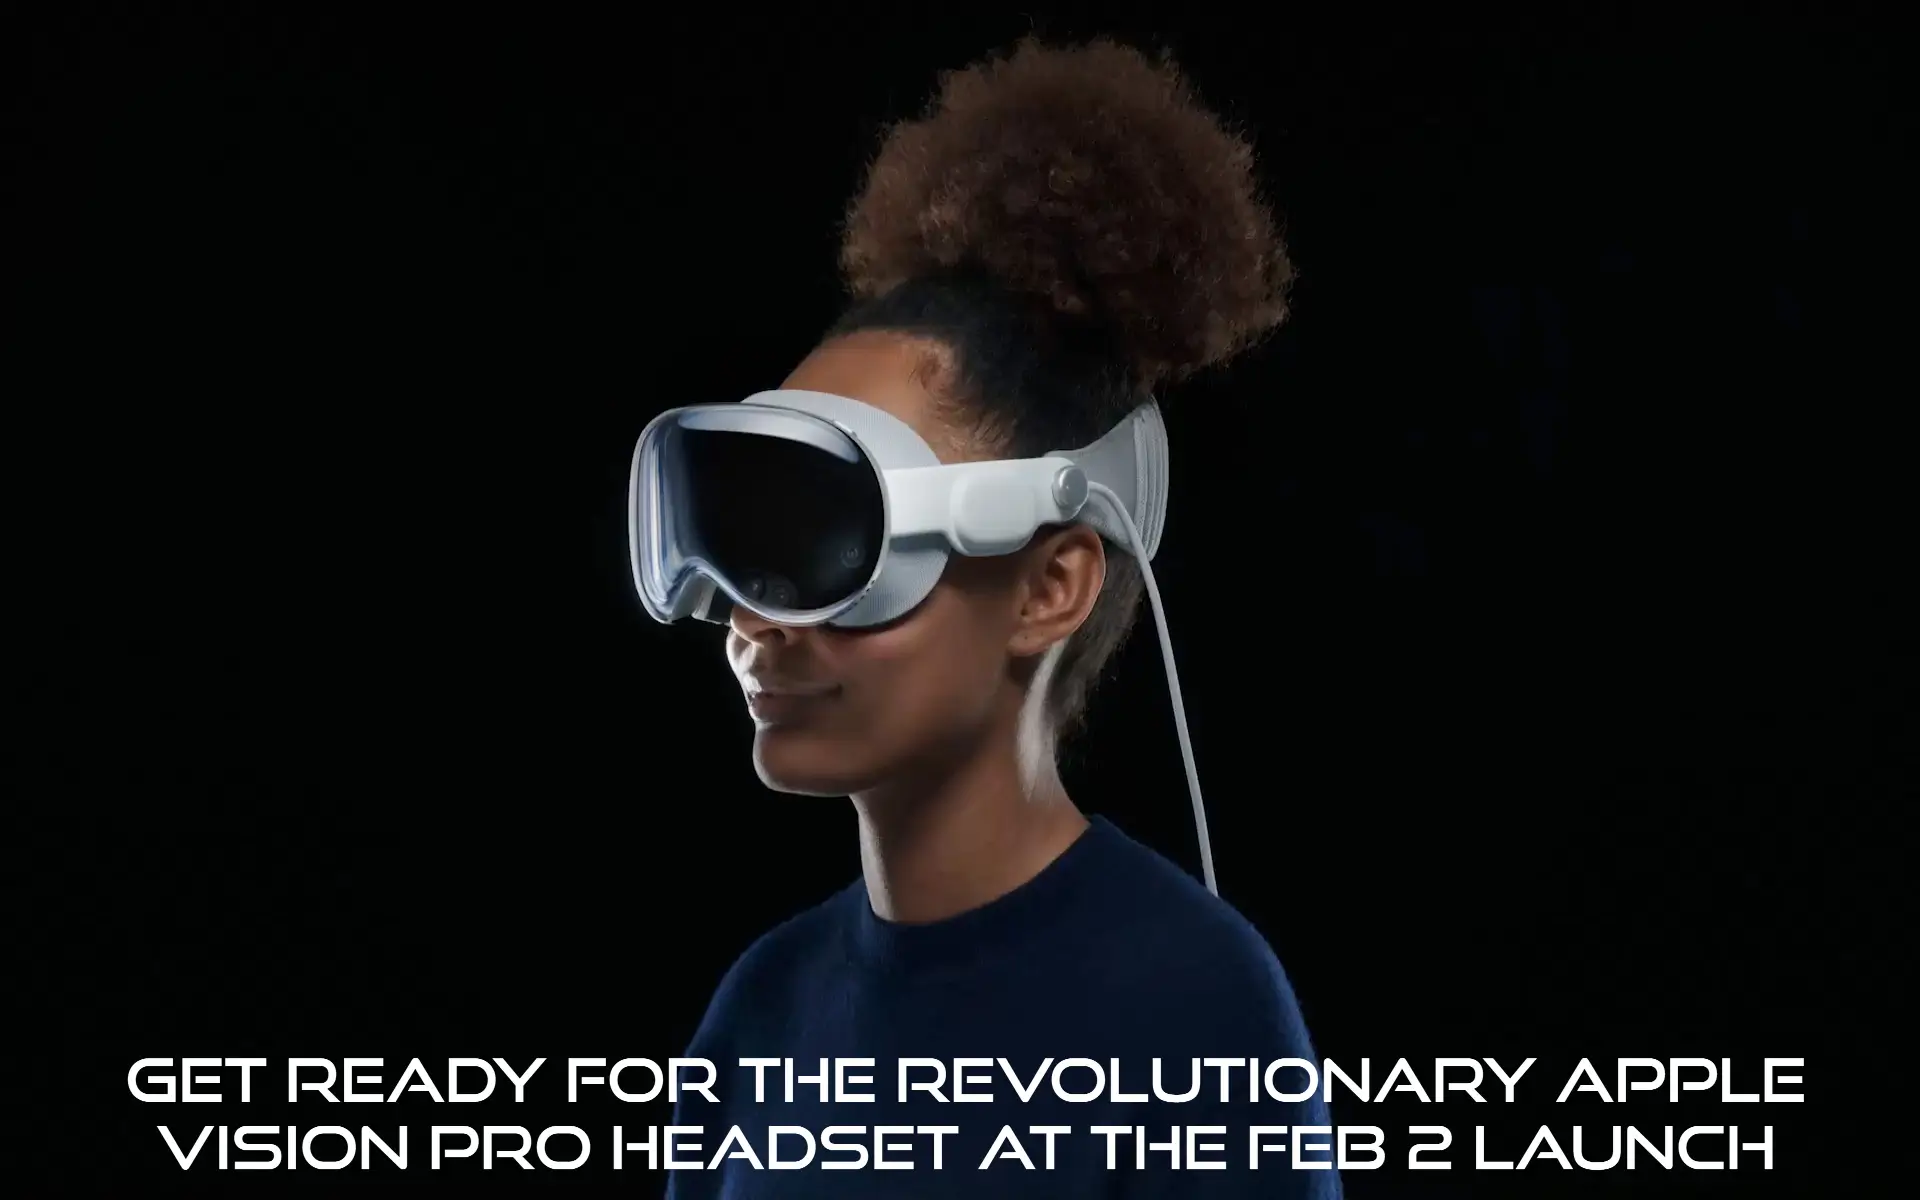 Apple Vision Pro Headsets Available for Purchase at Feb 2 Launch